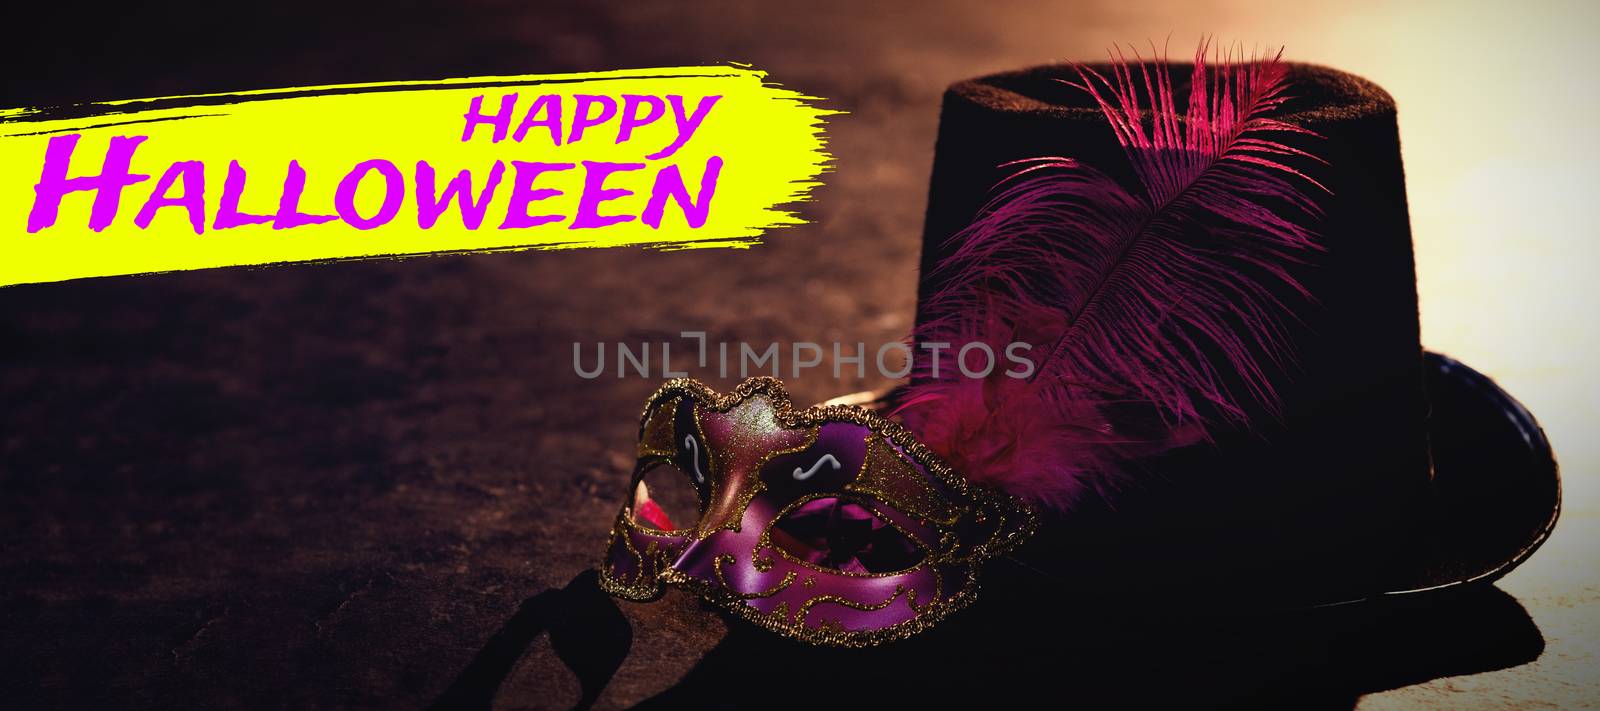 Digital image of happy Halloween text against masquerade masks and hat